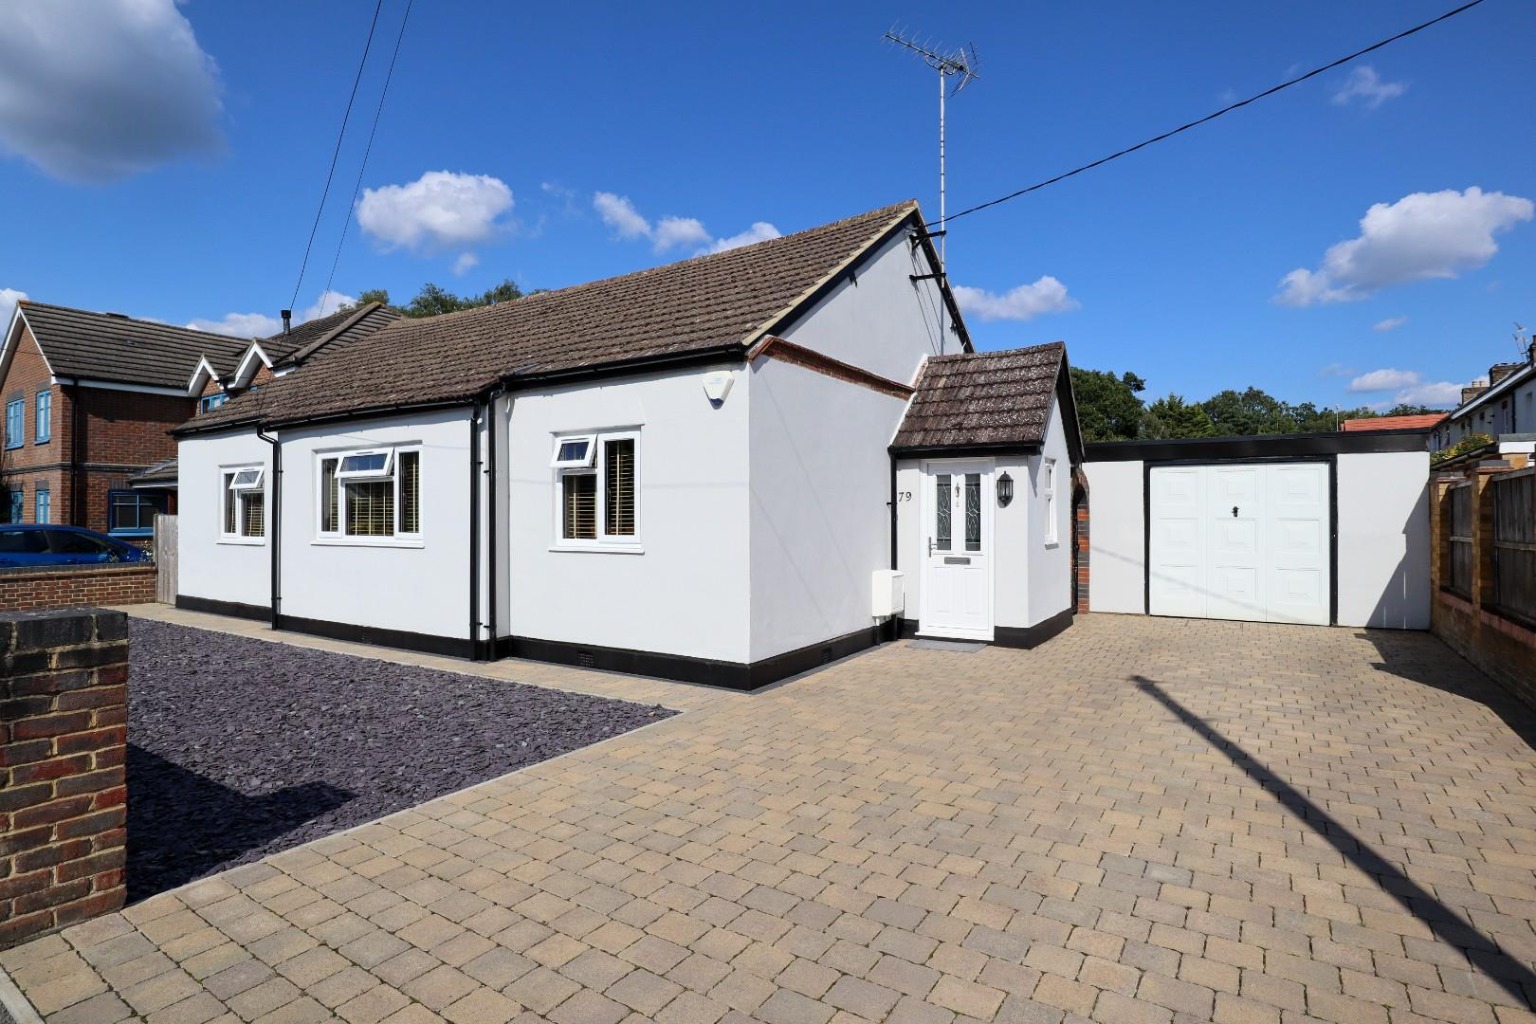 *MARKETED BY CHRIS GRAY*  This is a beautifully refurbished and extended, detached bungalow that is located in a popular location in Mytchett.  The accommodation is flexible providing three or four bedrooms, along with three stunning refitted bath/shower rooms.